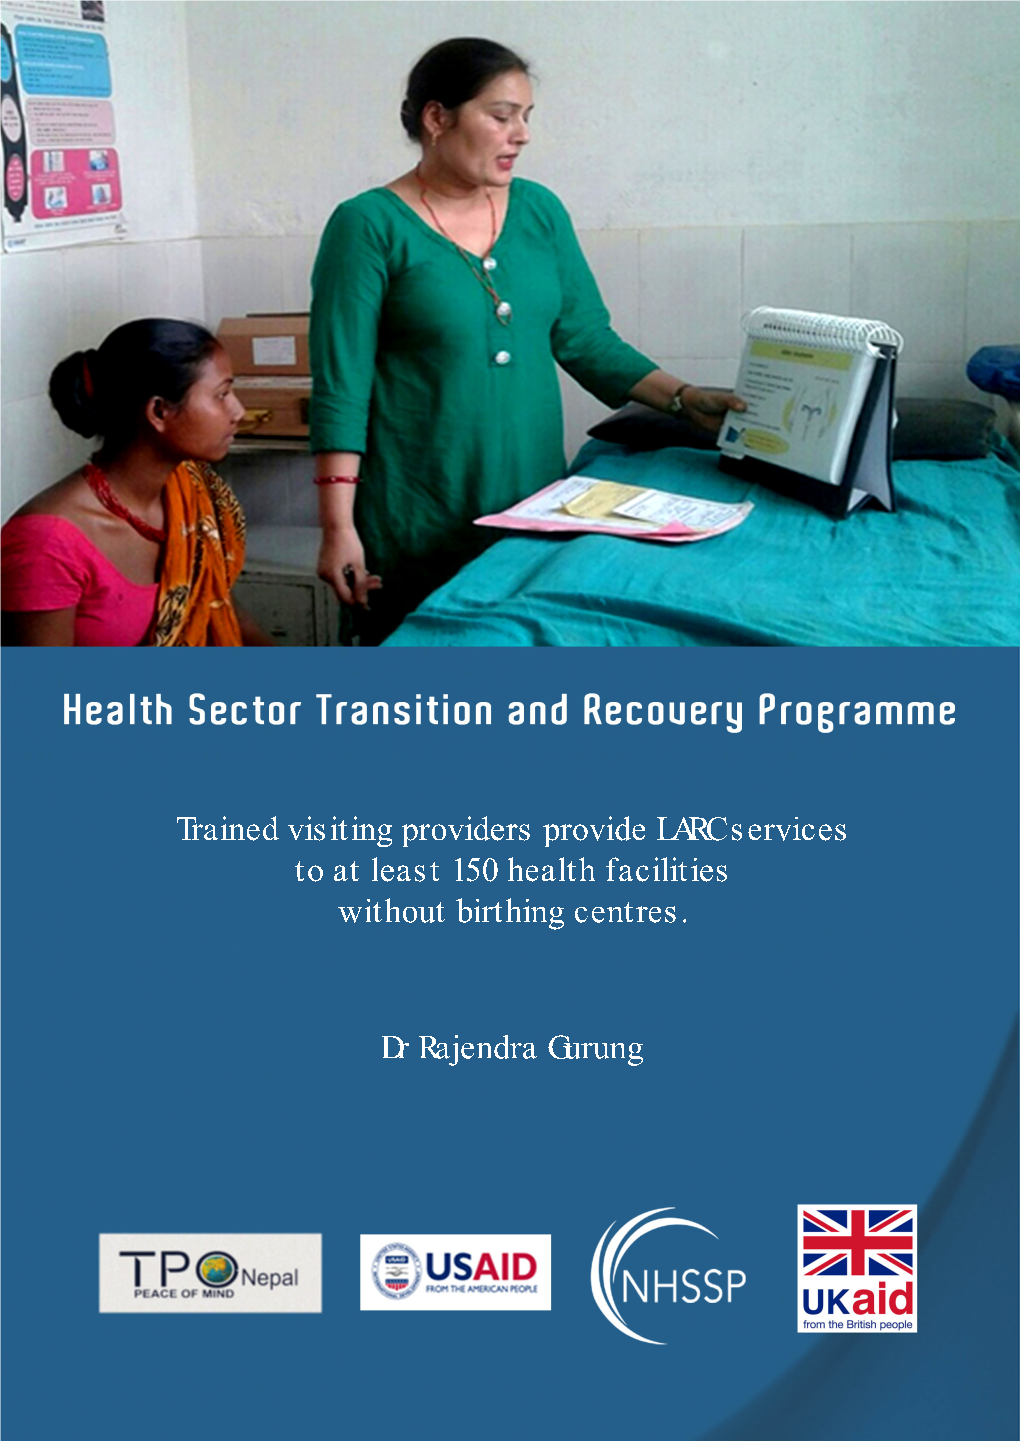 Trained Visiting Providers Provide LARC Services to at Least 150 Health Facilities Without Birthing Centres